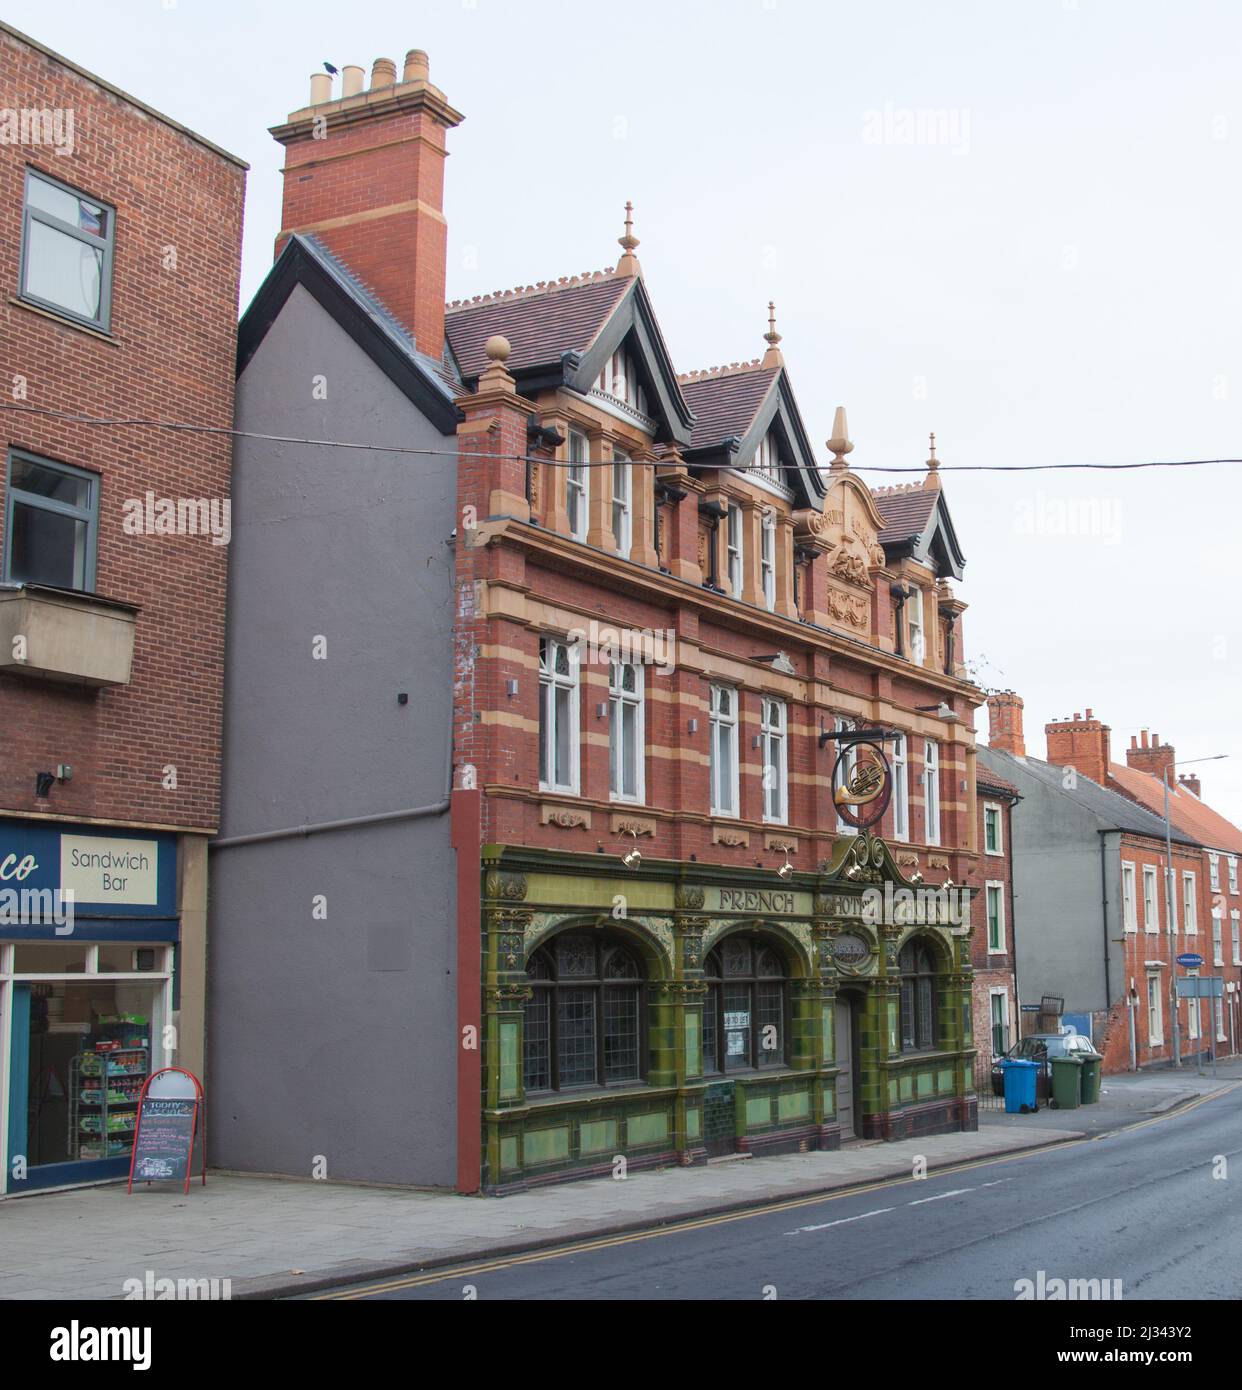 Views of buildings in Worksop, Nottinghamshire in the UK Stock Photo